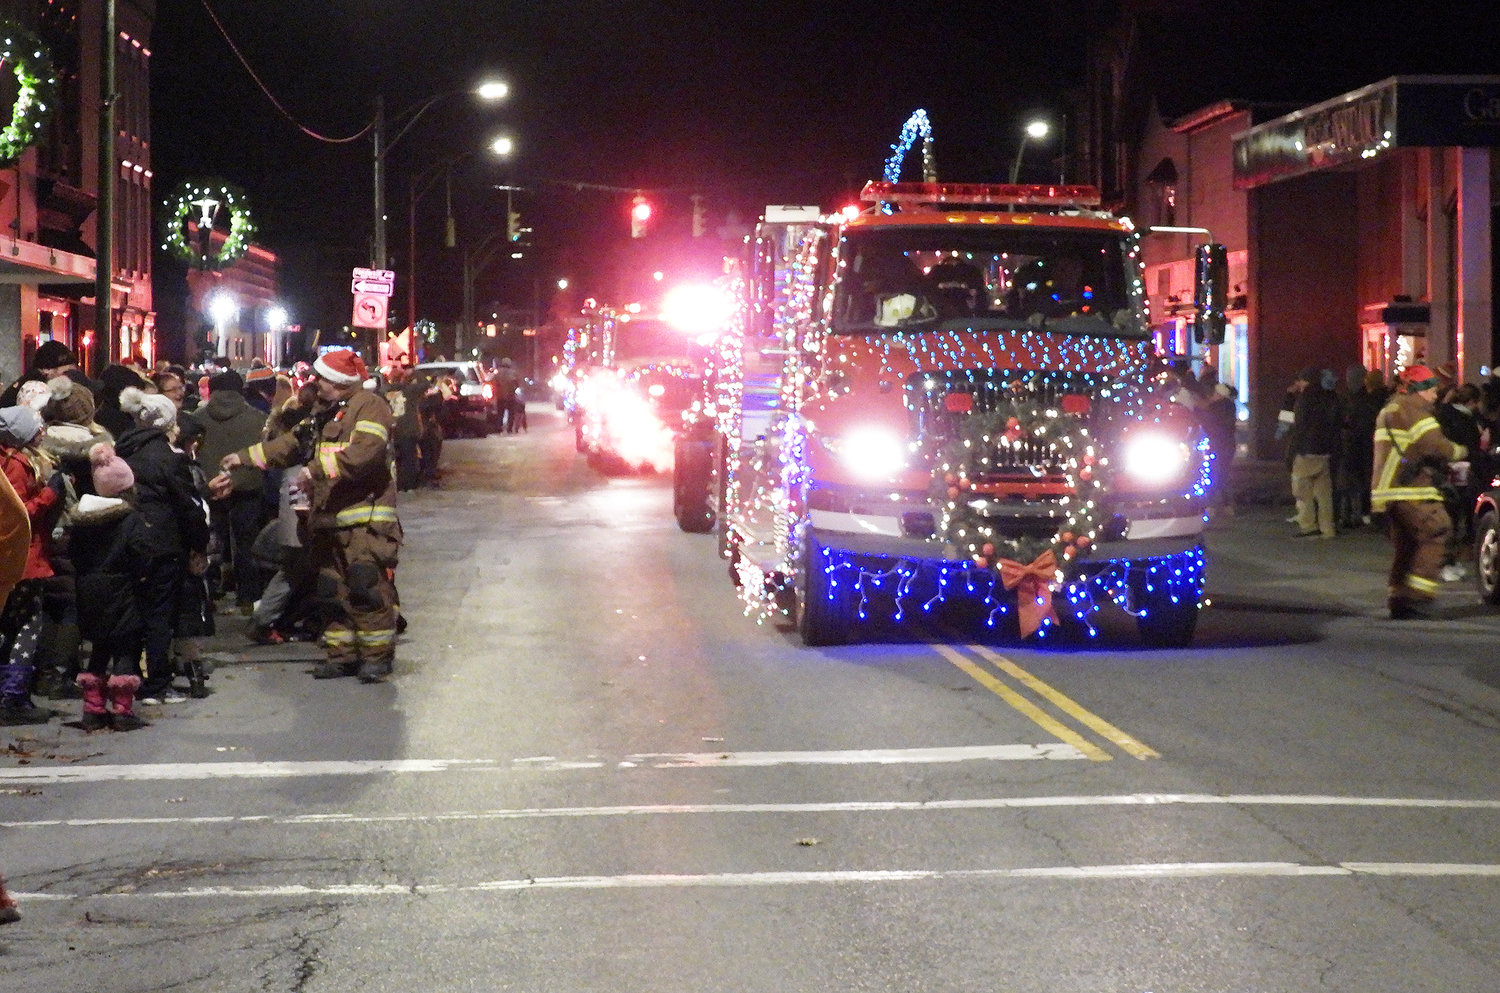 CHRISTMAS ON MAIN STREET — The first-ever Oneida Parade of Lights makes its way down Main Street. Pictured is the Munnsville Fire Department and their festive fire truck, handing out candy to good little boys and girls. For more photos of the Oneida Christmas Festival, visit the Rome Sentinel website.